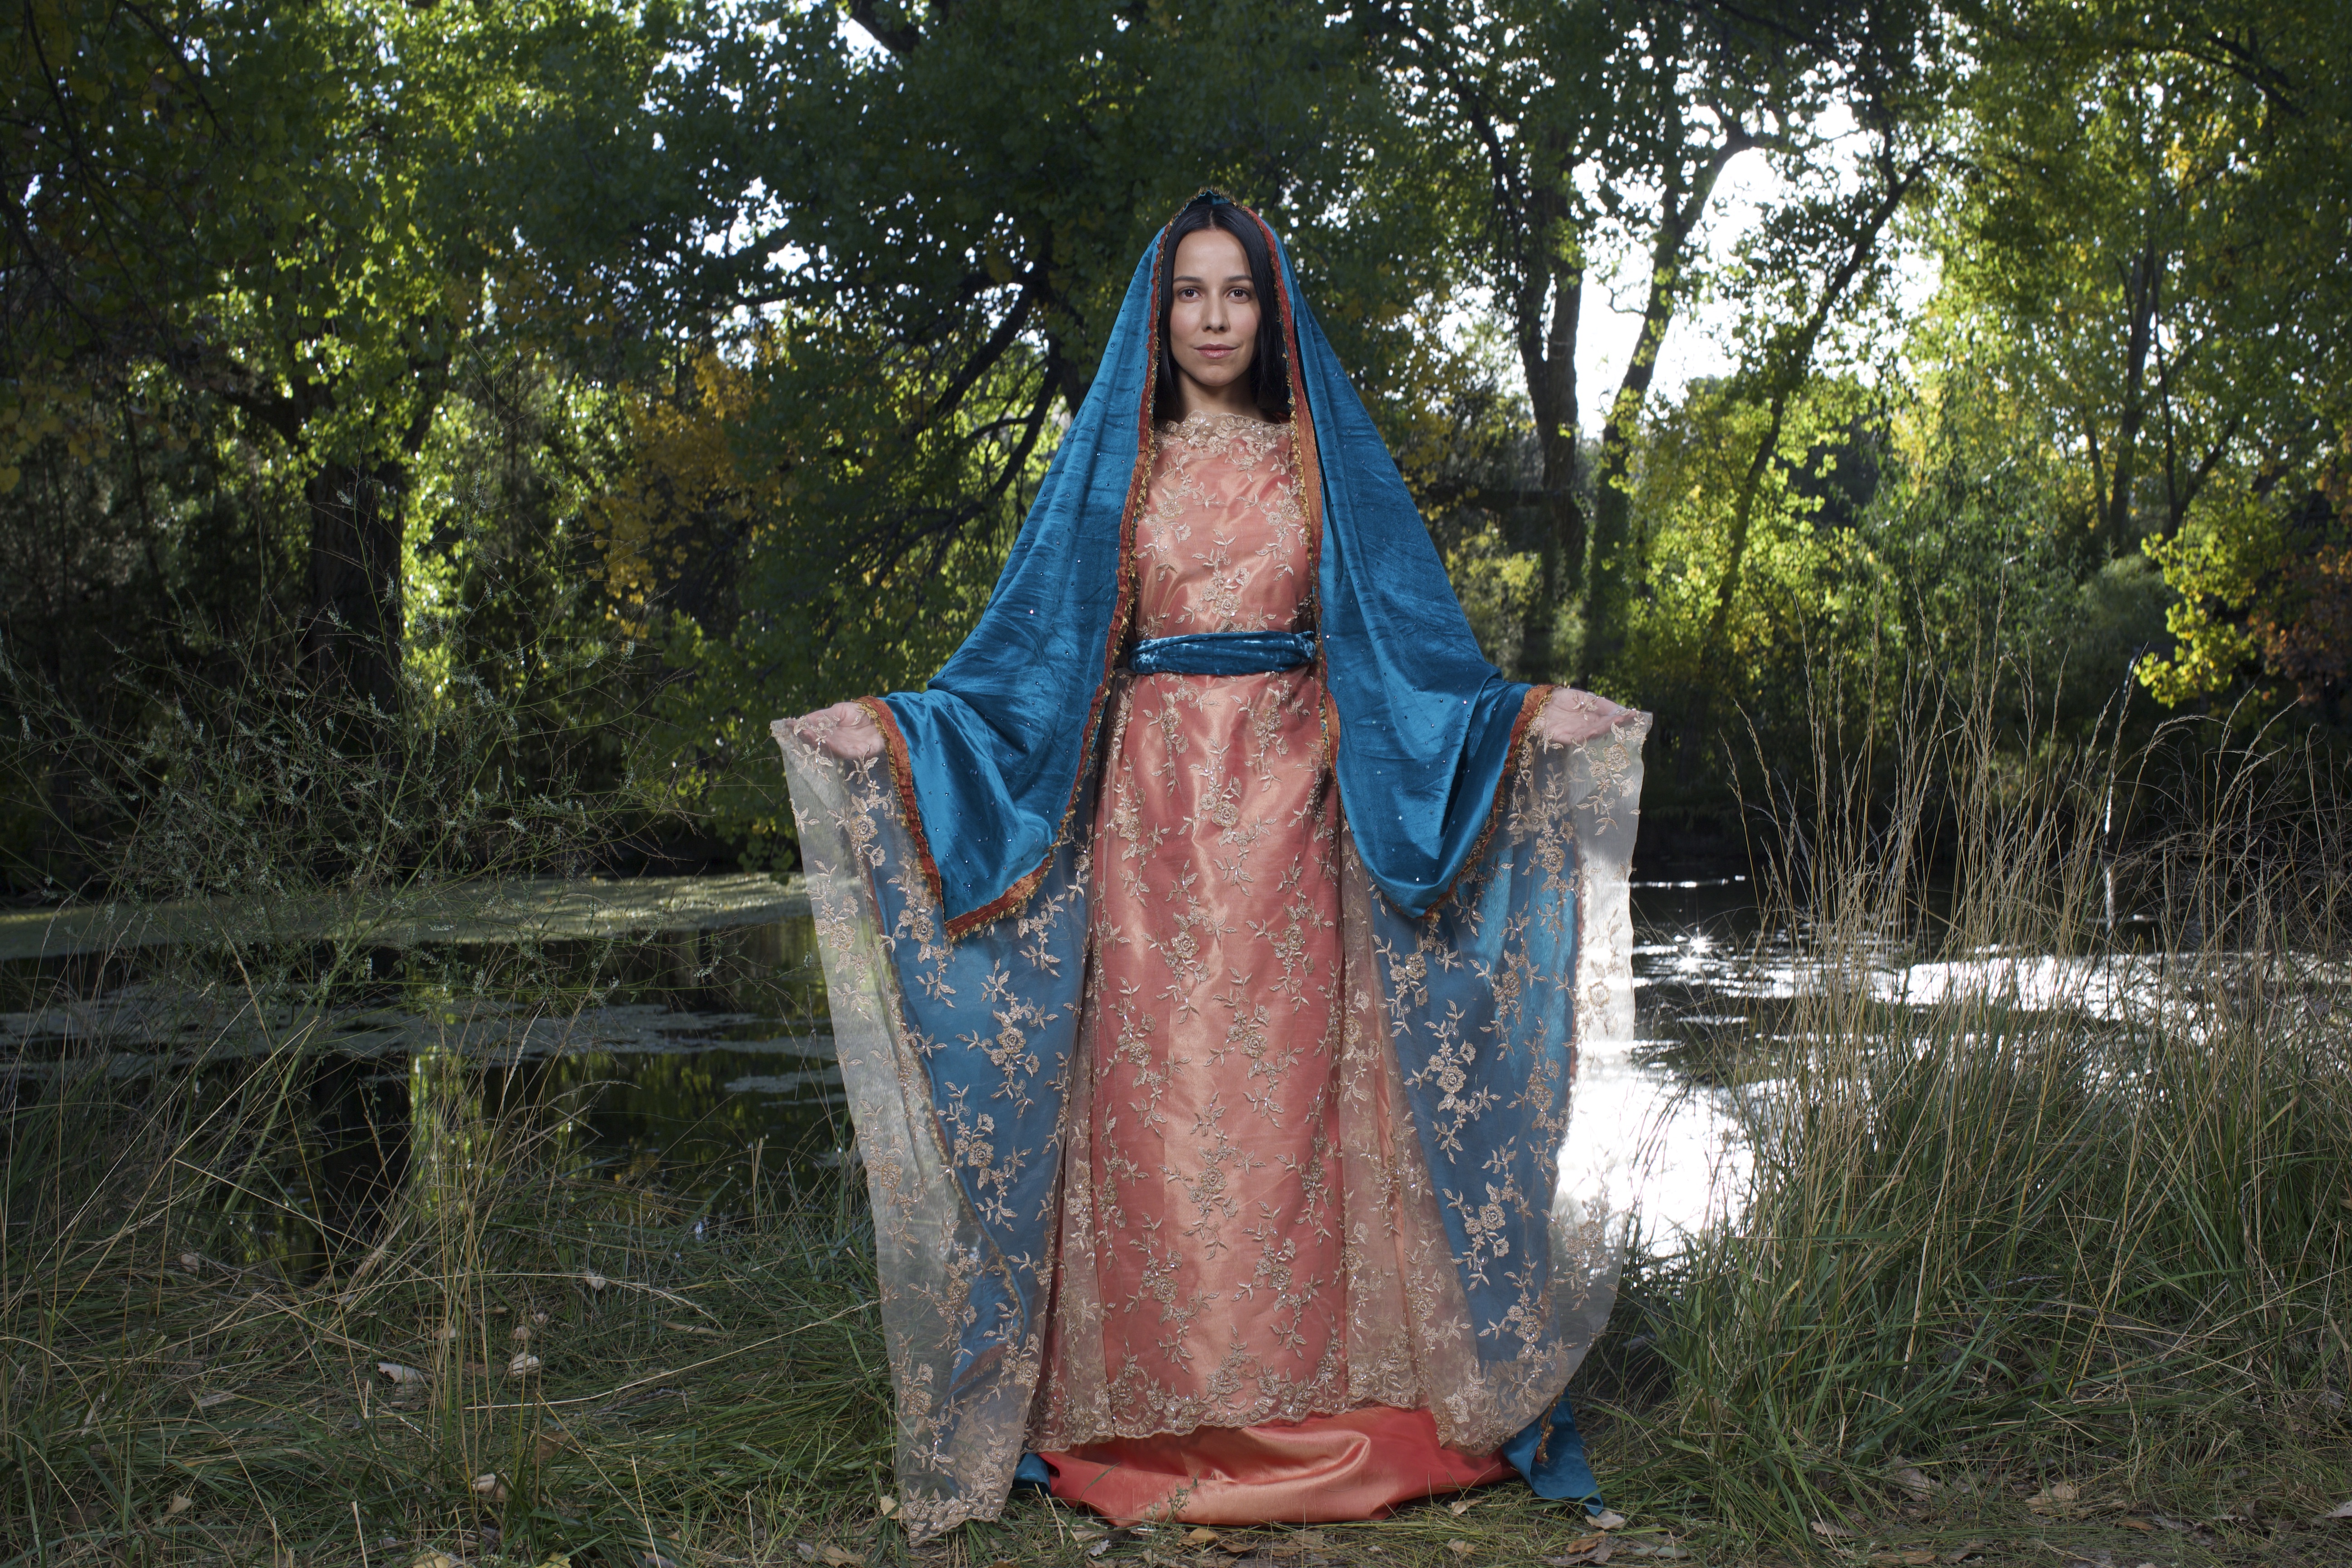 Our Lady of Guadalupe is the subject of a new film